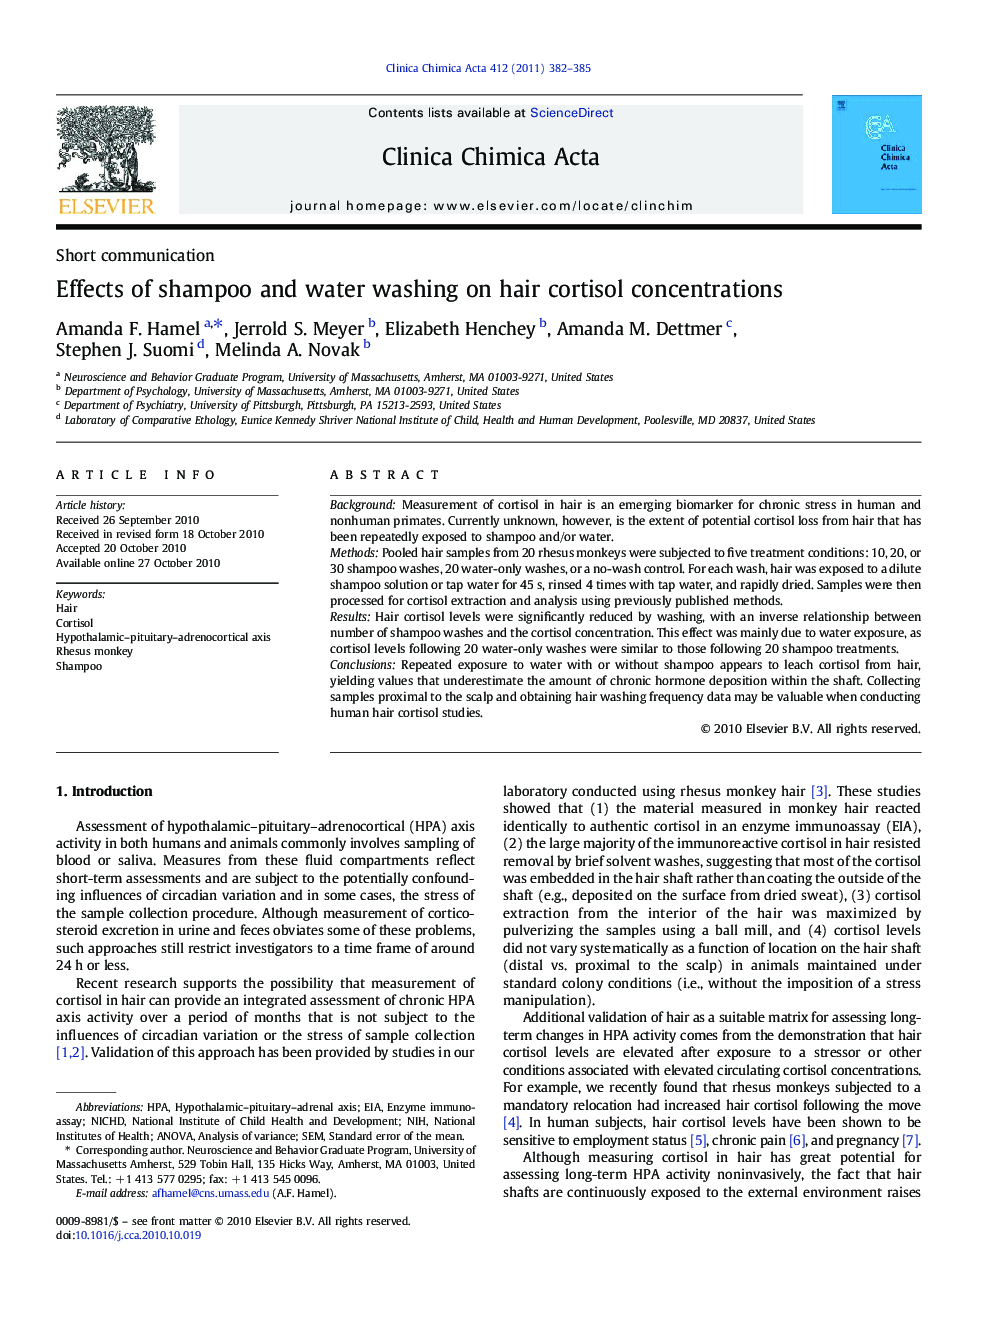 Effects of shampoo and water washing on hair cortisol concentrations